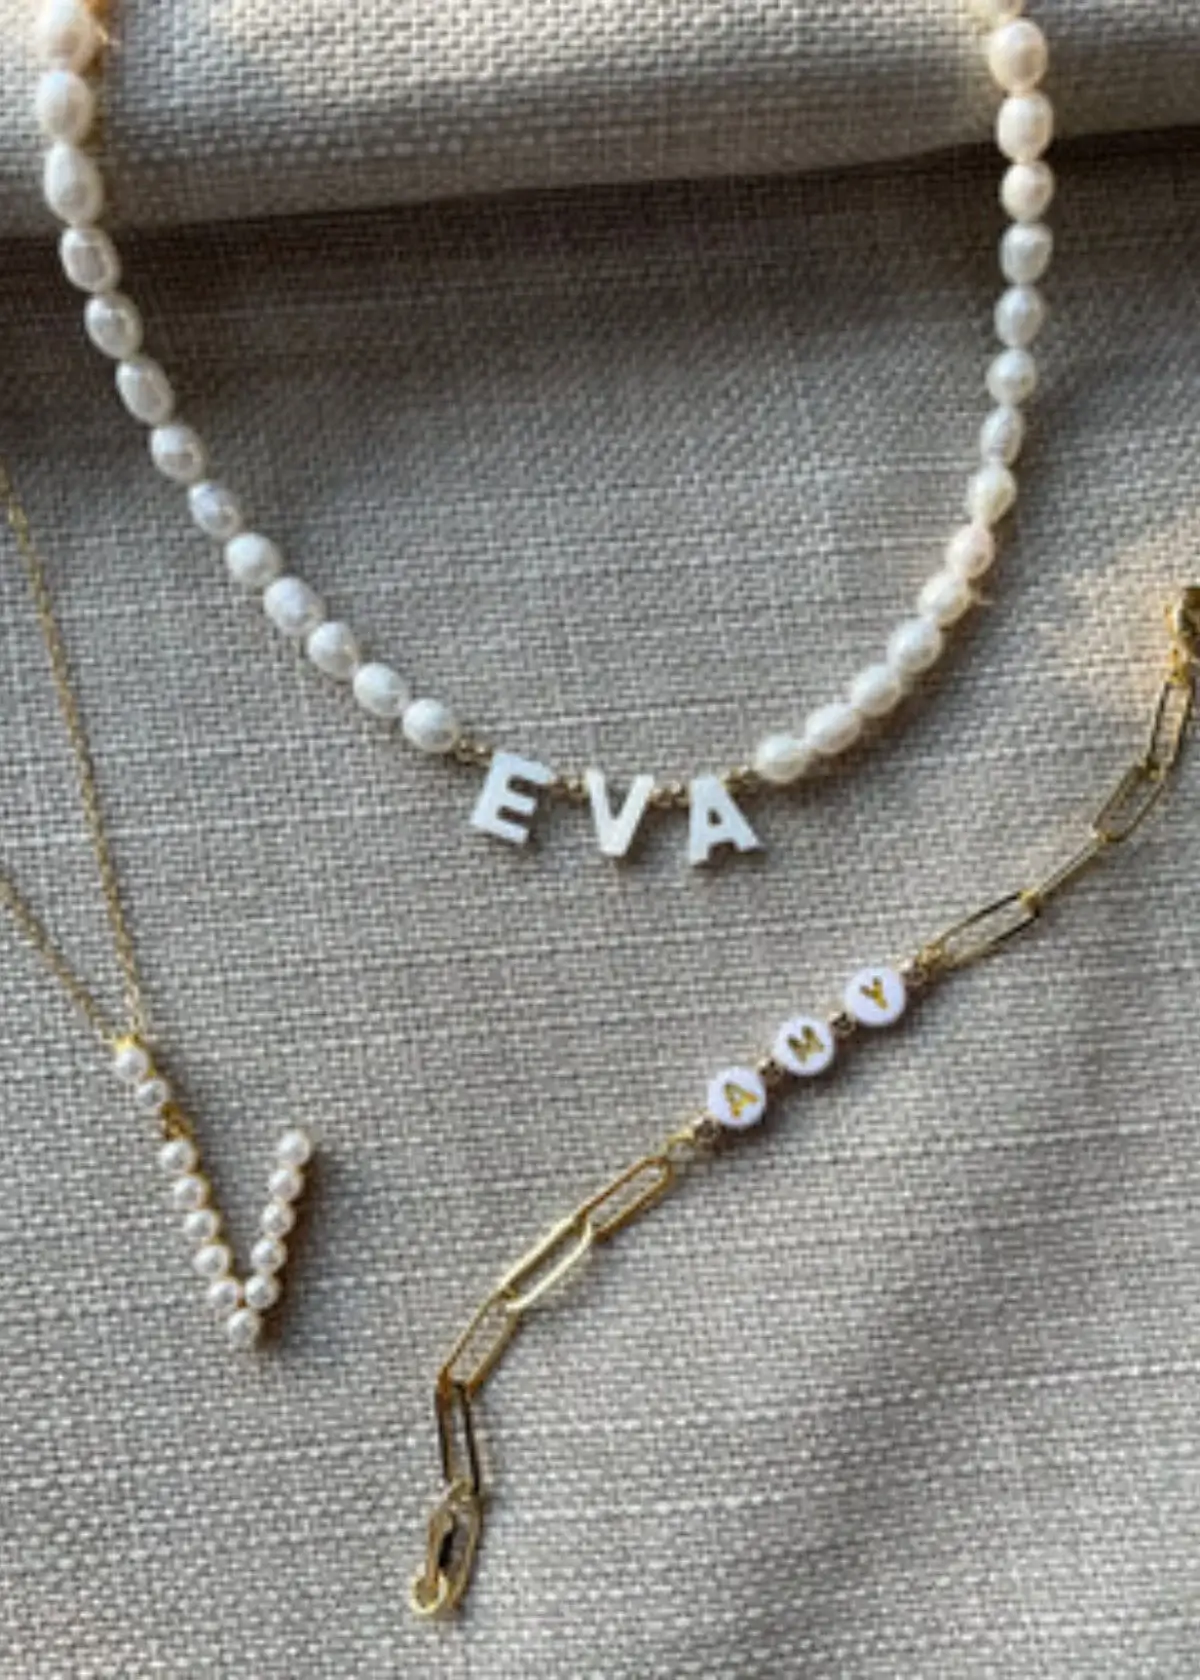 What types of pearls are used in a pearl name necklace?